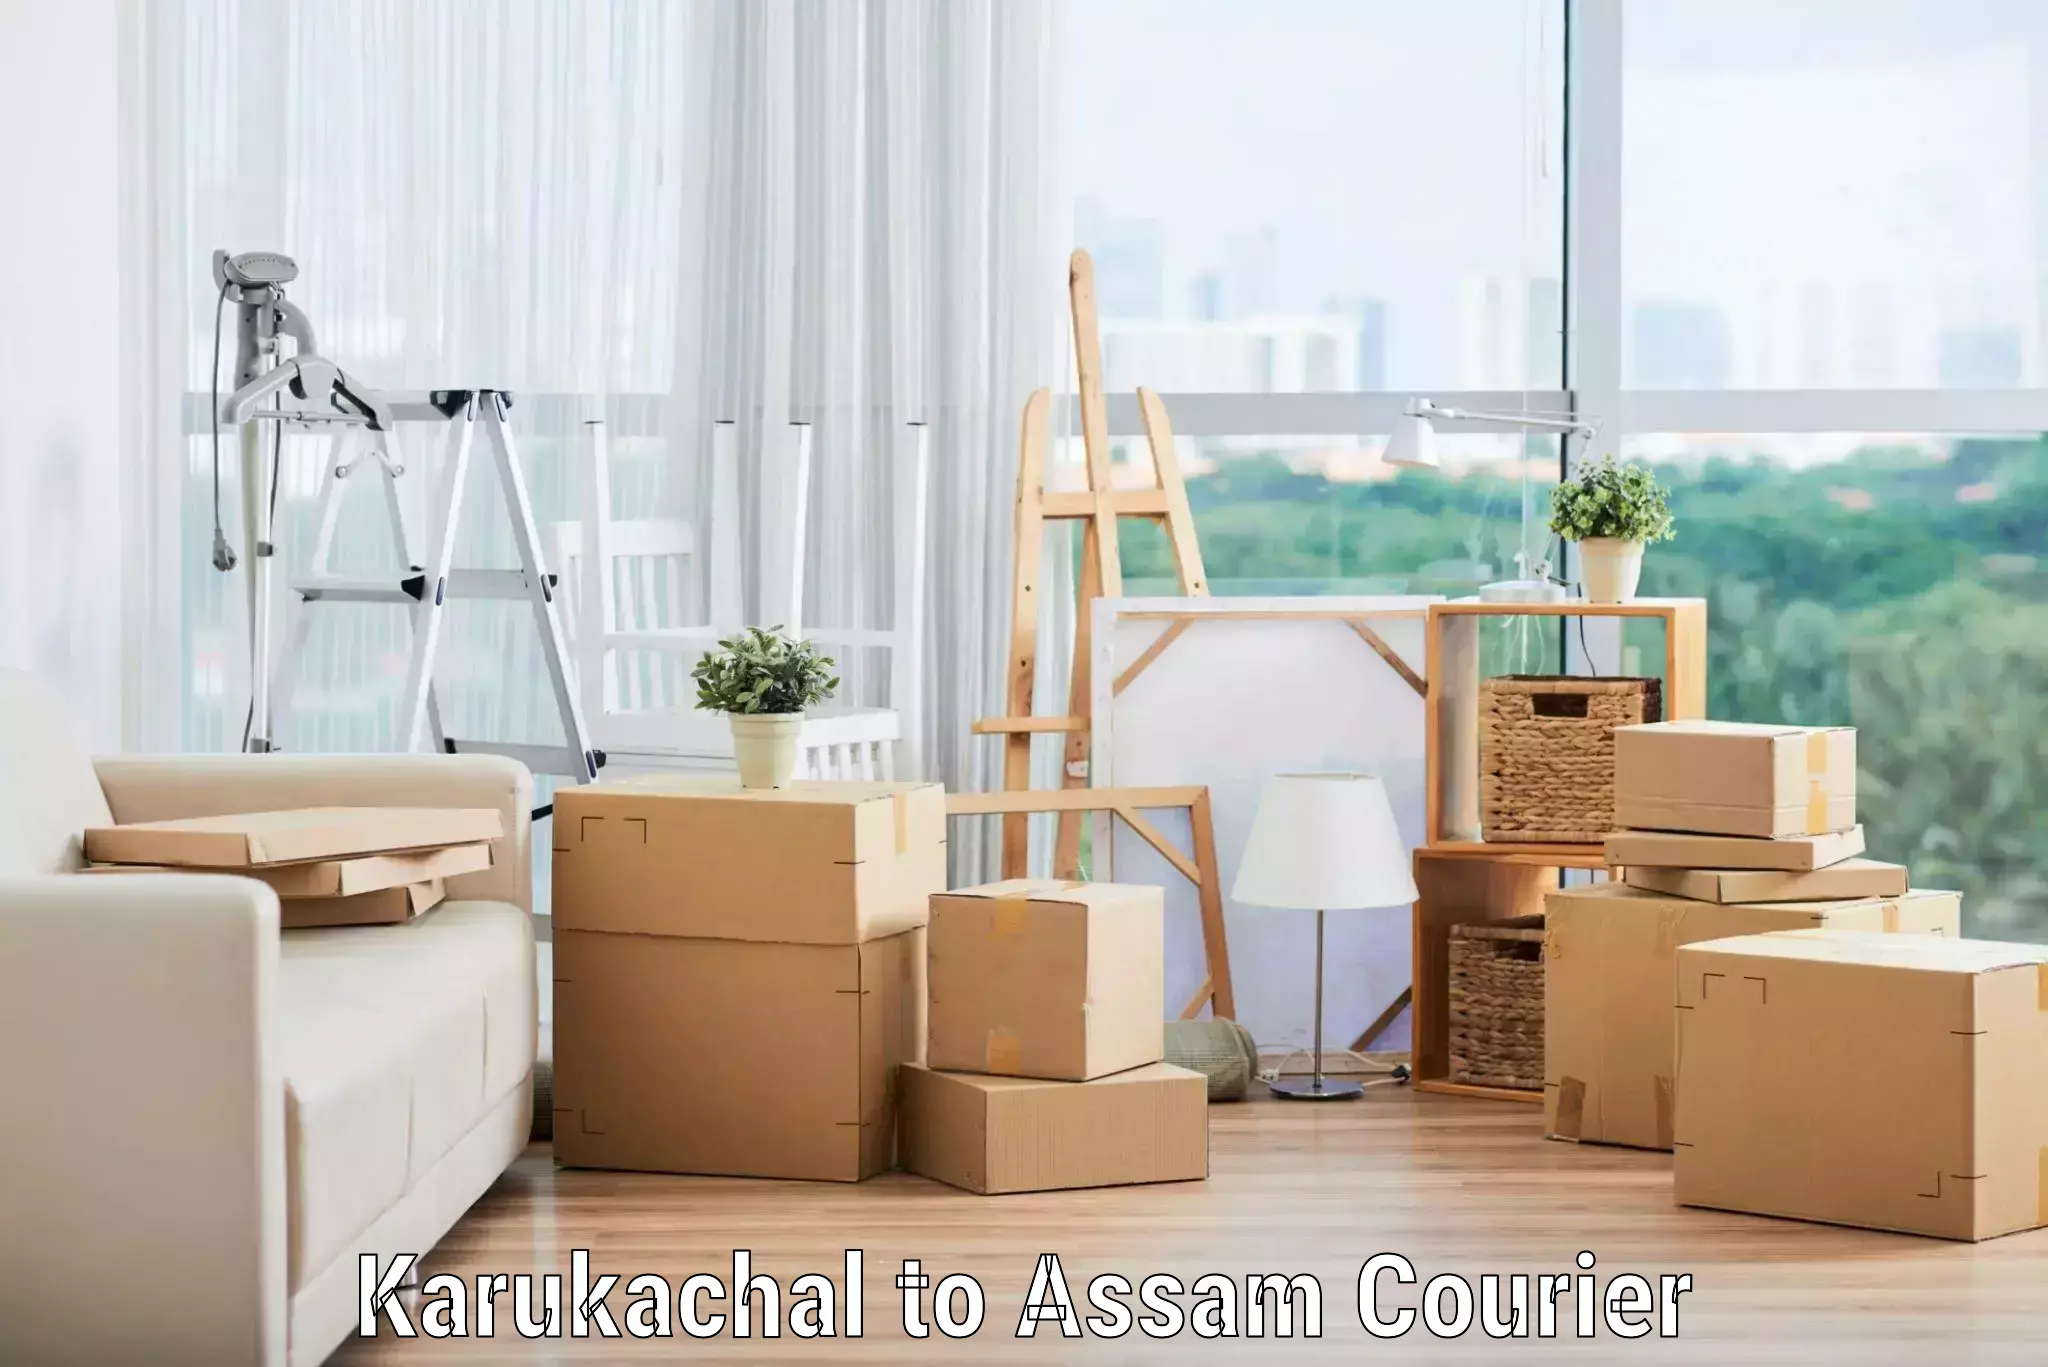 Moving and handling services in Karukachal to Guwahati